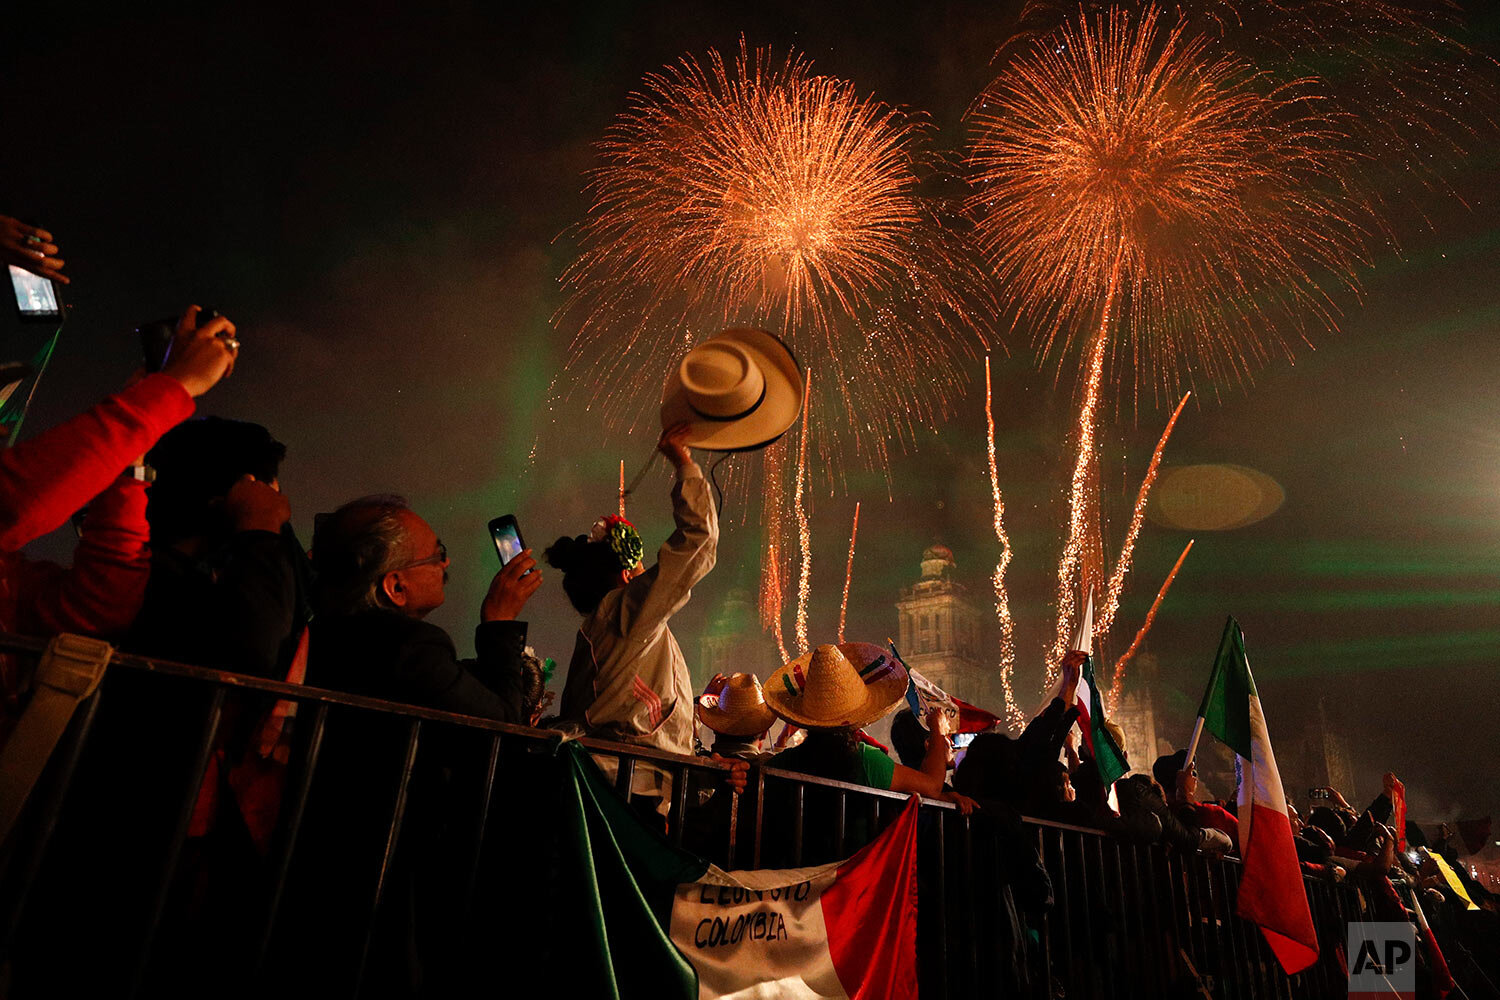  Revelers celebrate as fireworks explode over the Metropolitan Cathedral in Mexico City after President Andres Manuel Lopez Obrador gave the annual independence shout from the balcony of the National Palace to kick off Independence Day celebrations o